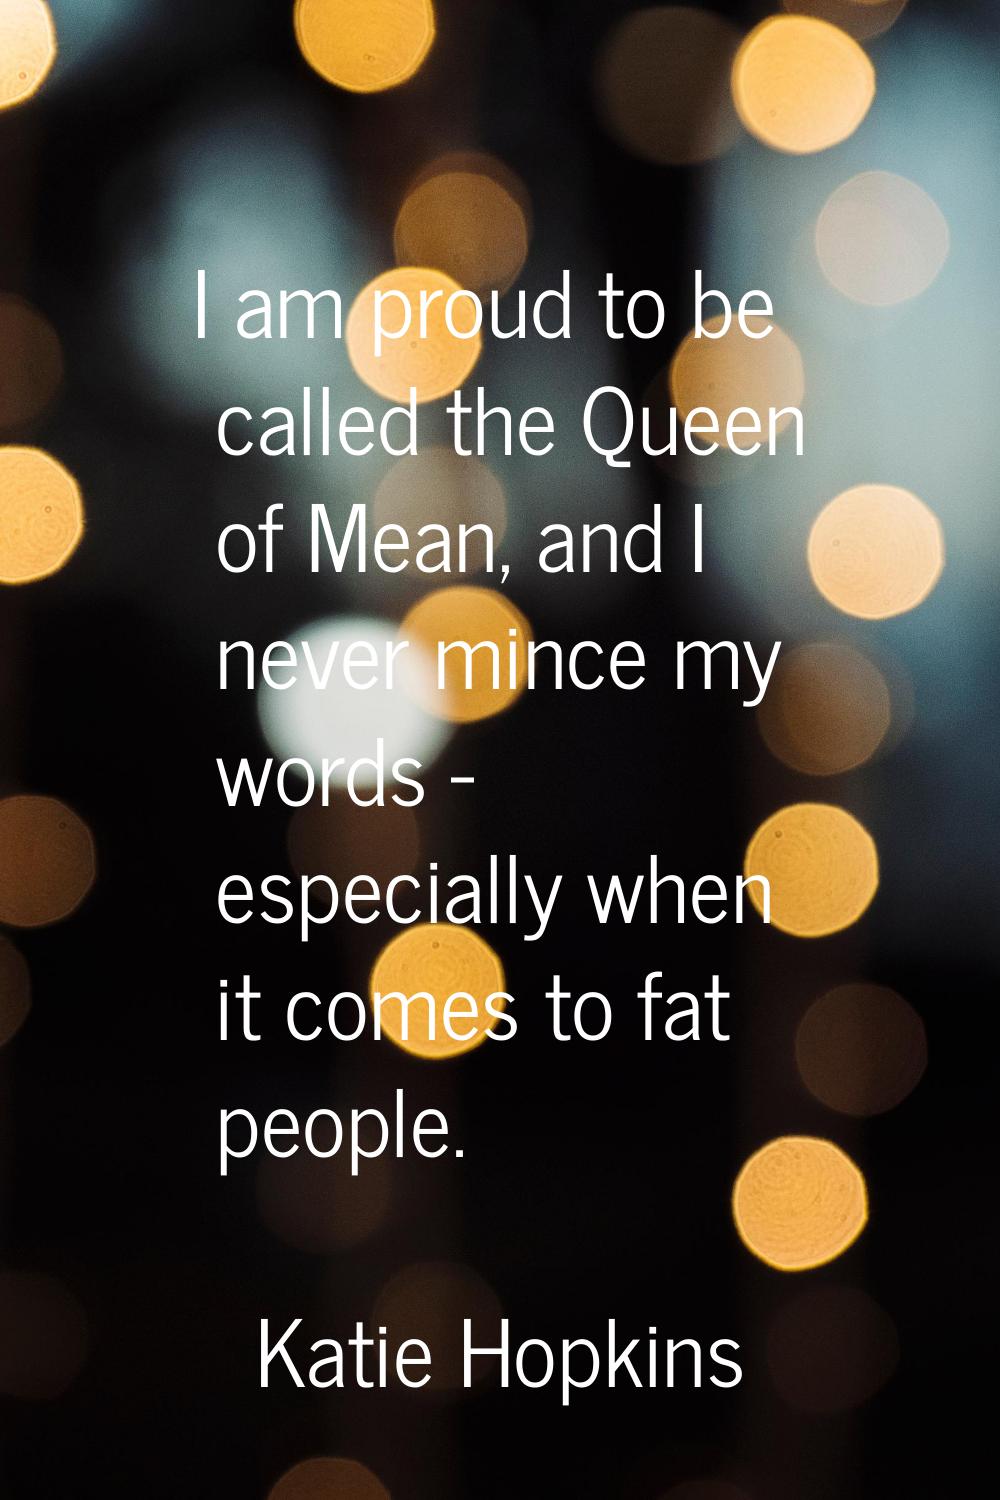 I am proud to be called the Queen of Mean, and I never mince my words - especially when it comes to